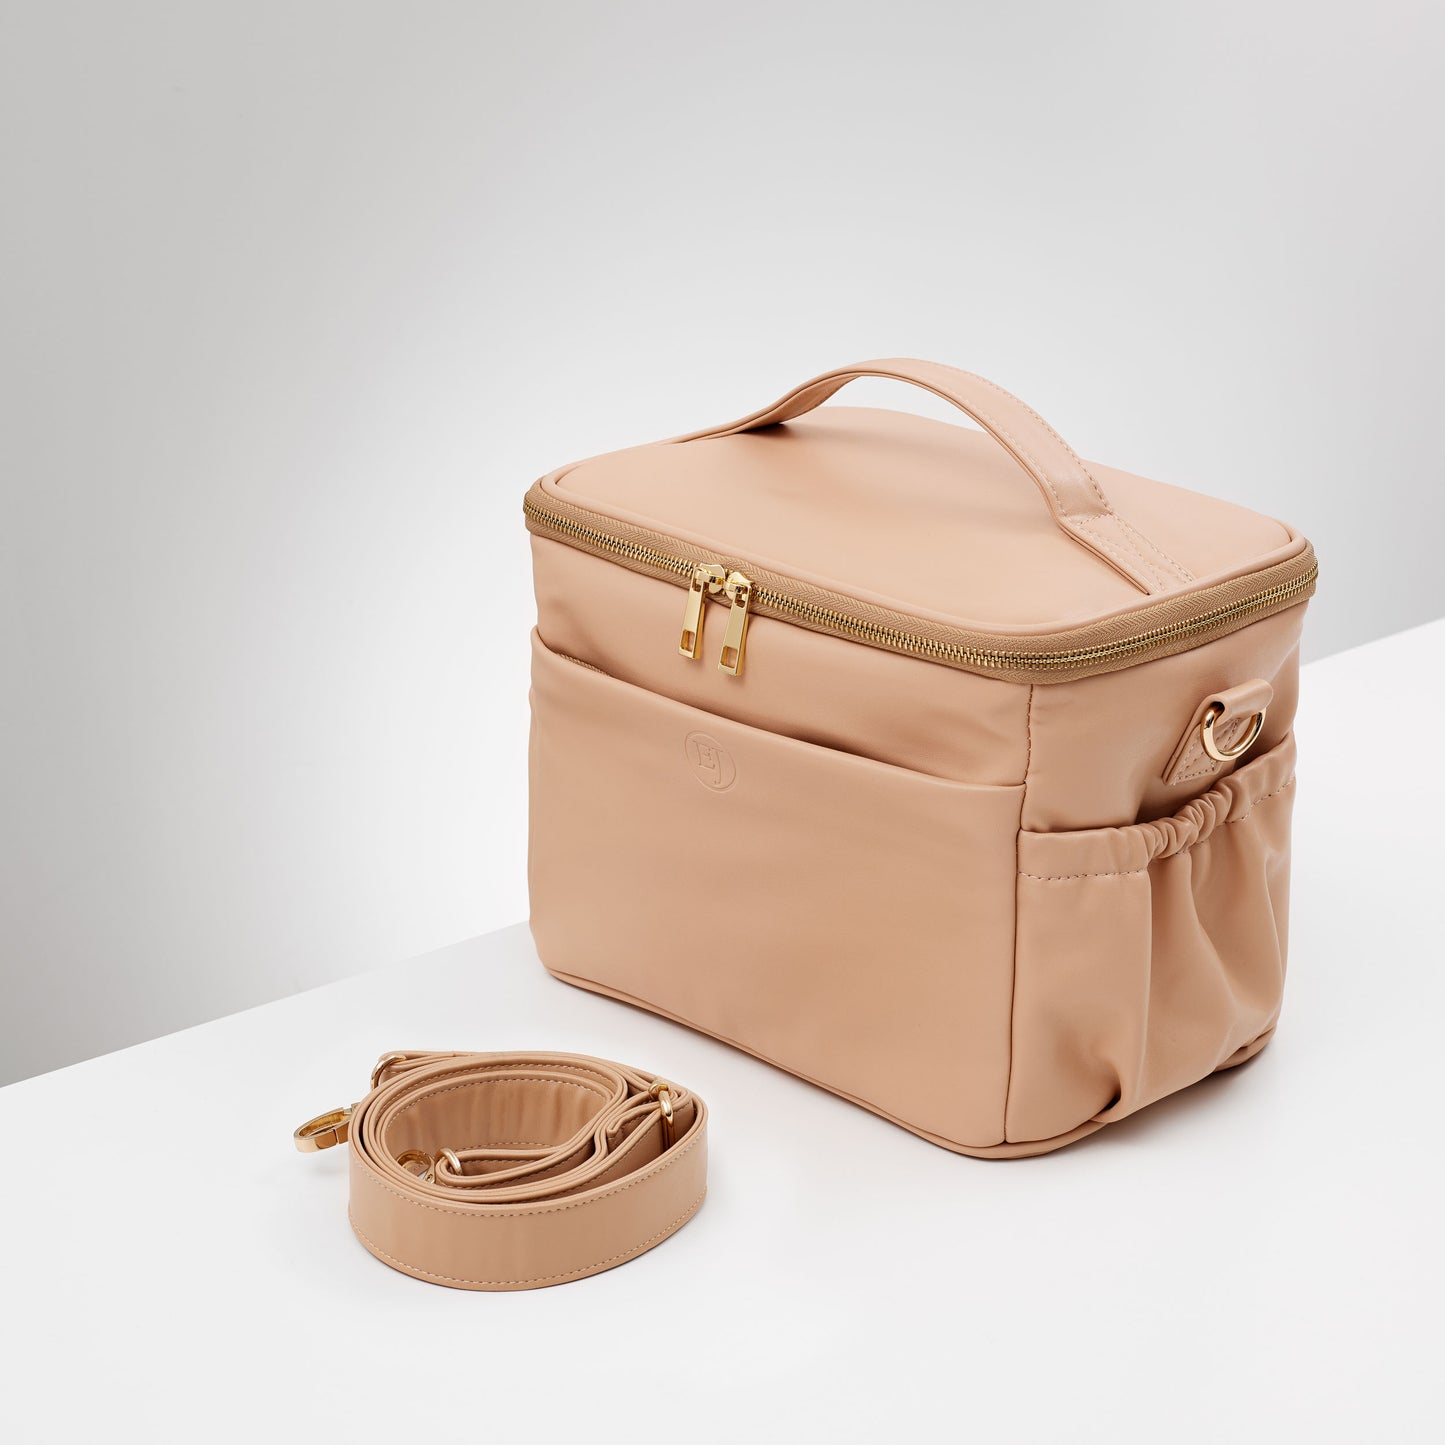 leather lunch bag chic in beige colour